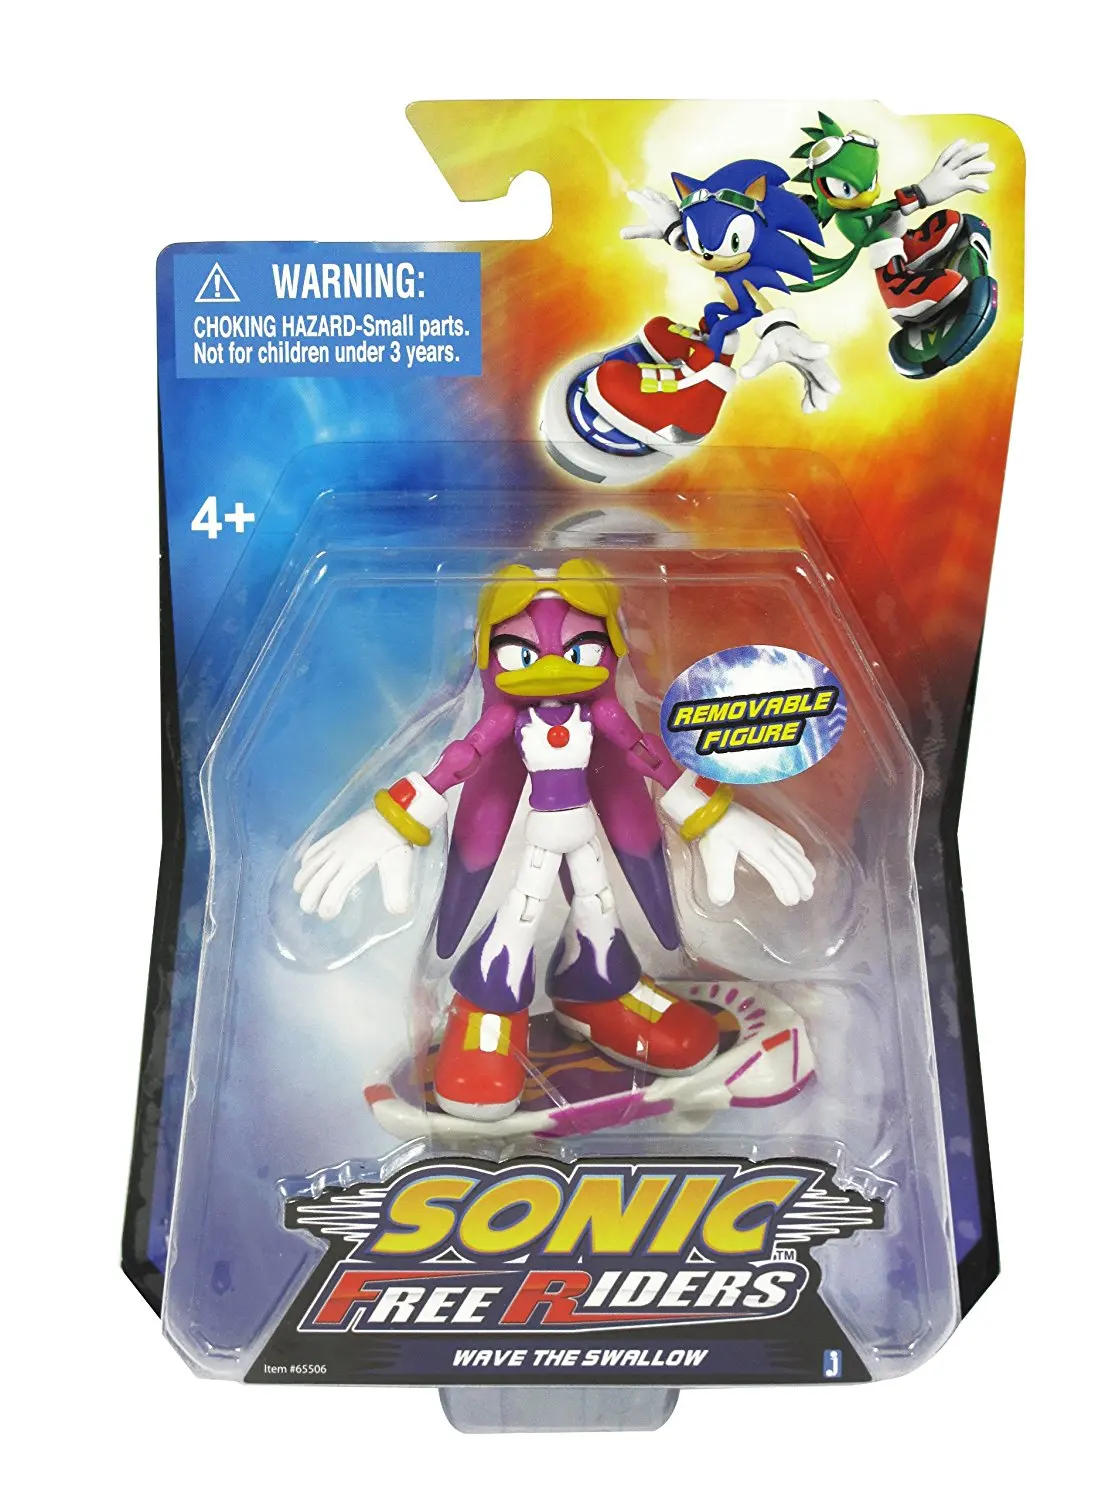 Buy Sonic Wave Free Riders Action Figure in Cheap Price on Alibaba.com1112 x 1500